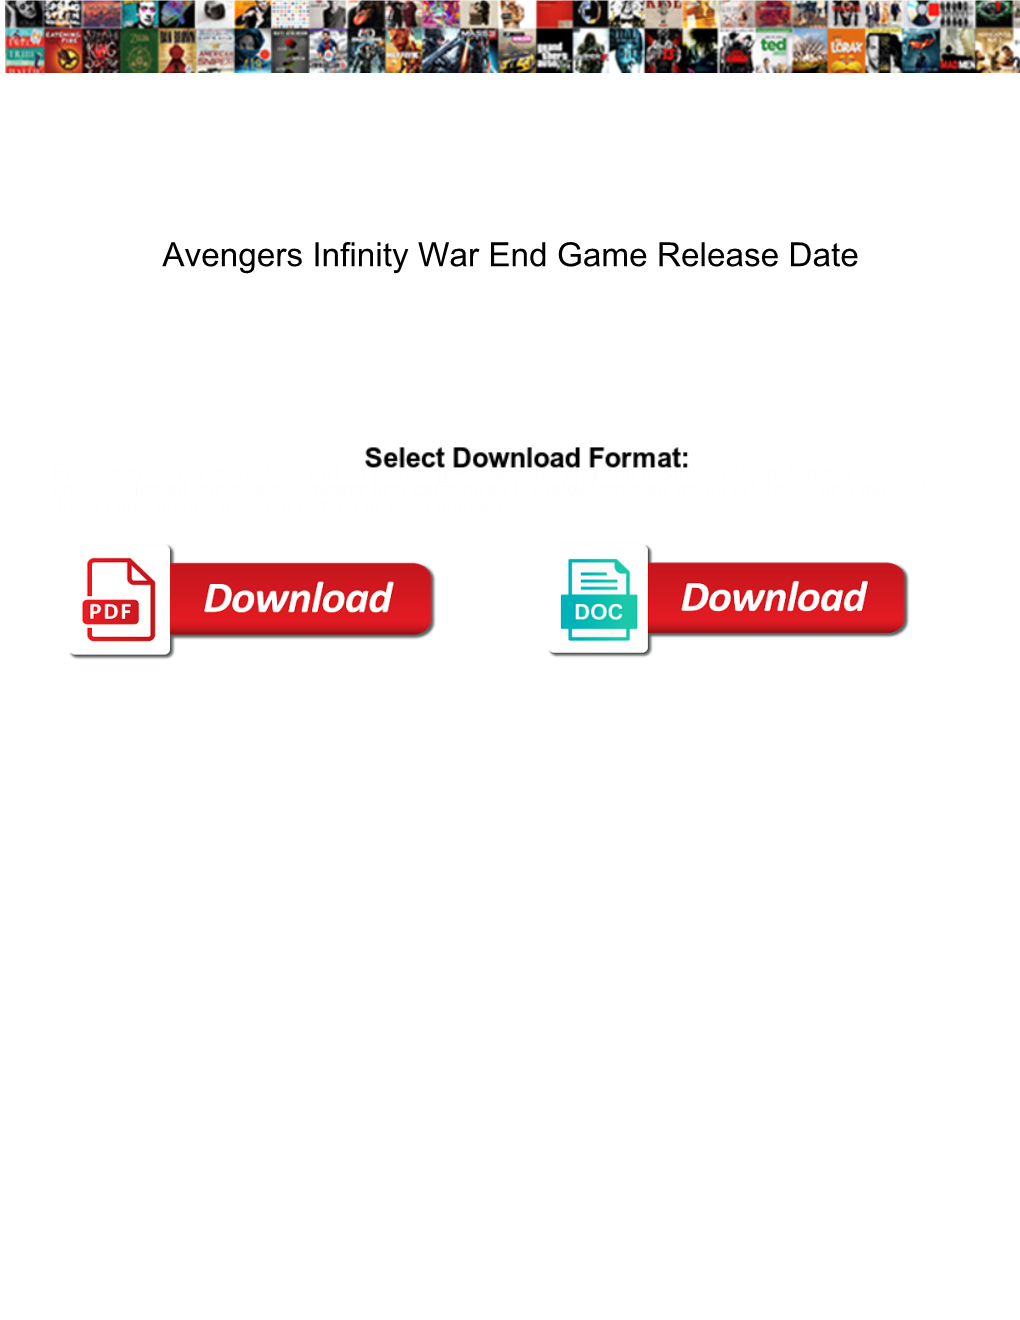 Avengers Infinity War End Game Release Date